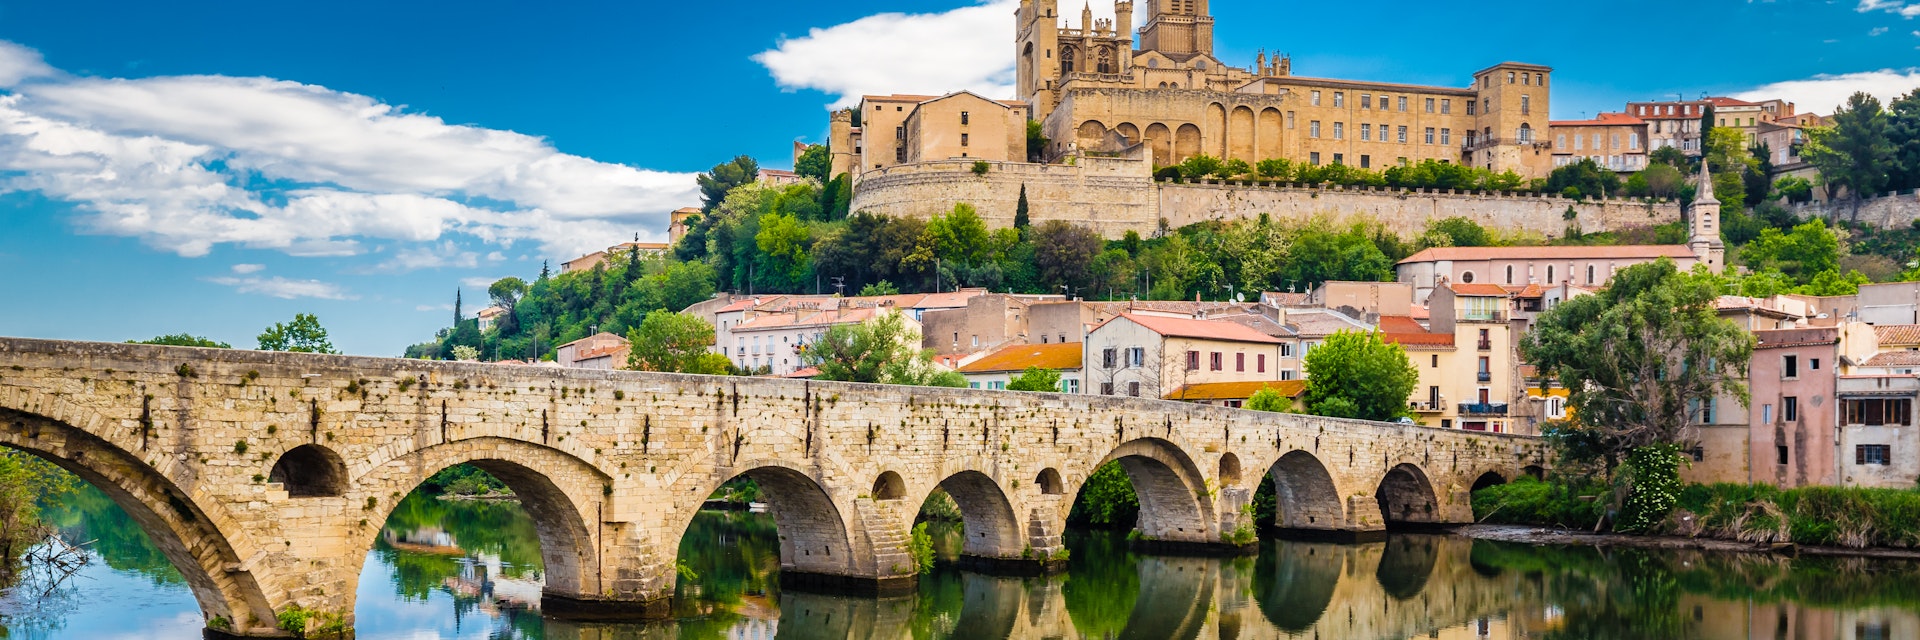 Old Bridge And Cathedral In Beziers - Hérault, Occitanie, France, Europe